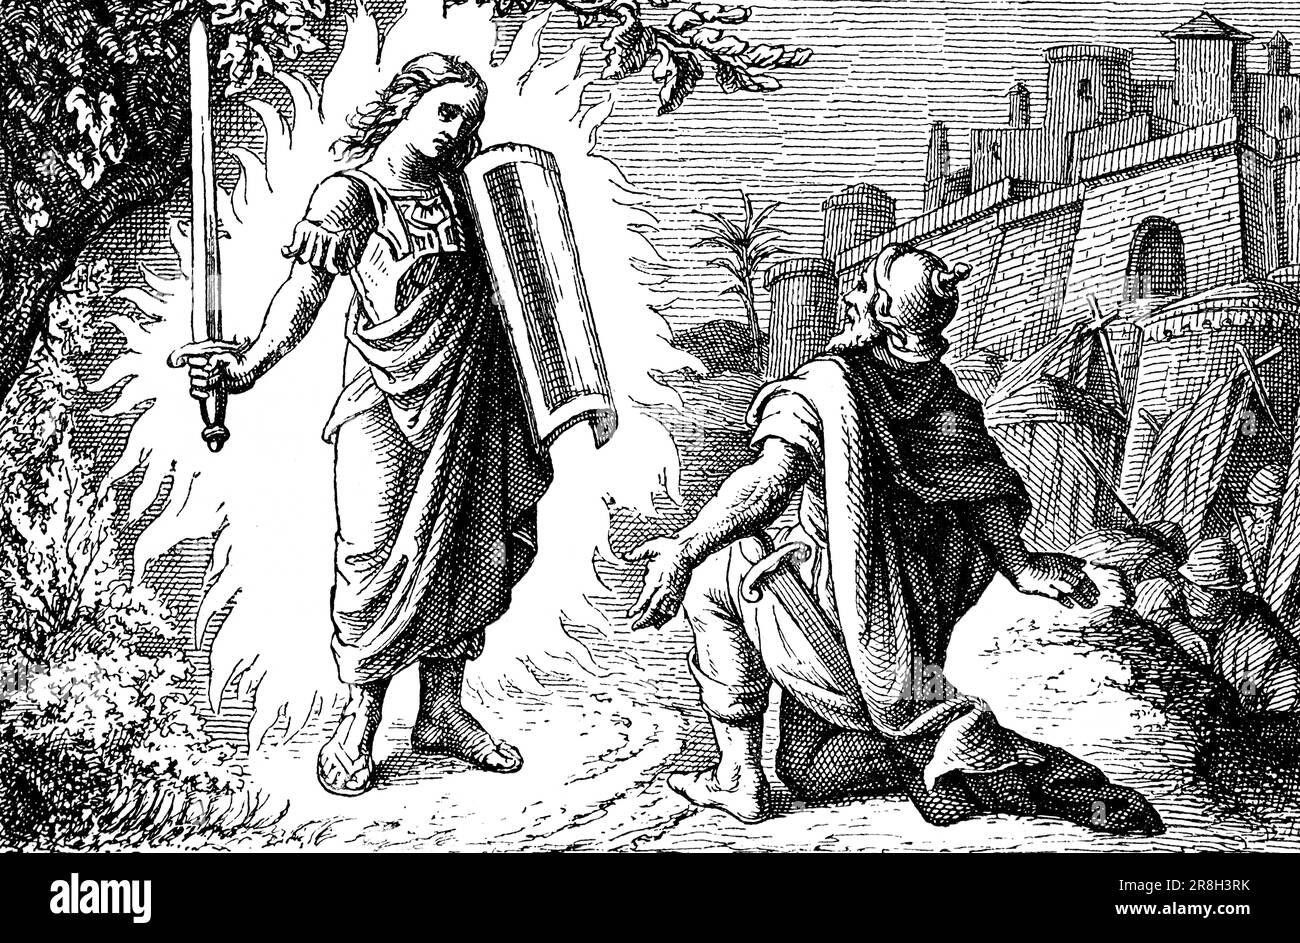 God's message to Joshua, Book of Joshua, chapter 1, verse 1-9, Old Testament, Bible, historic illustration 1890 Stock Photo